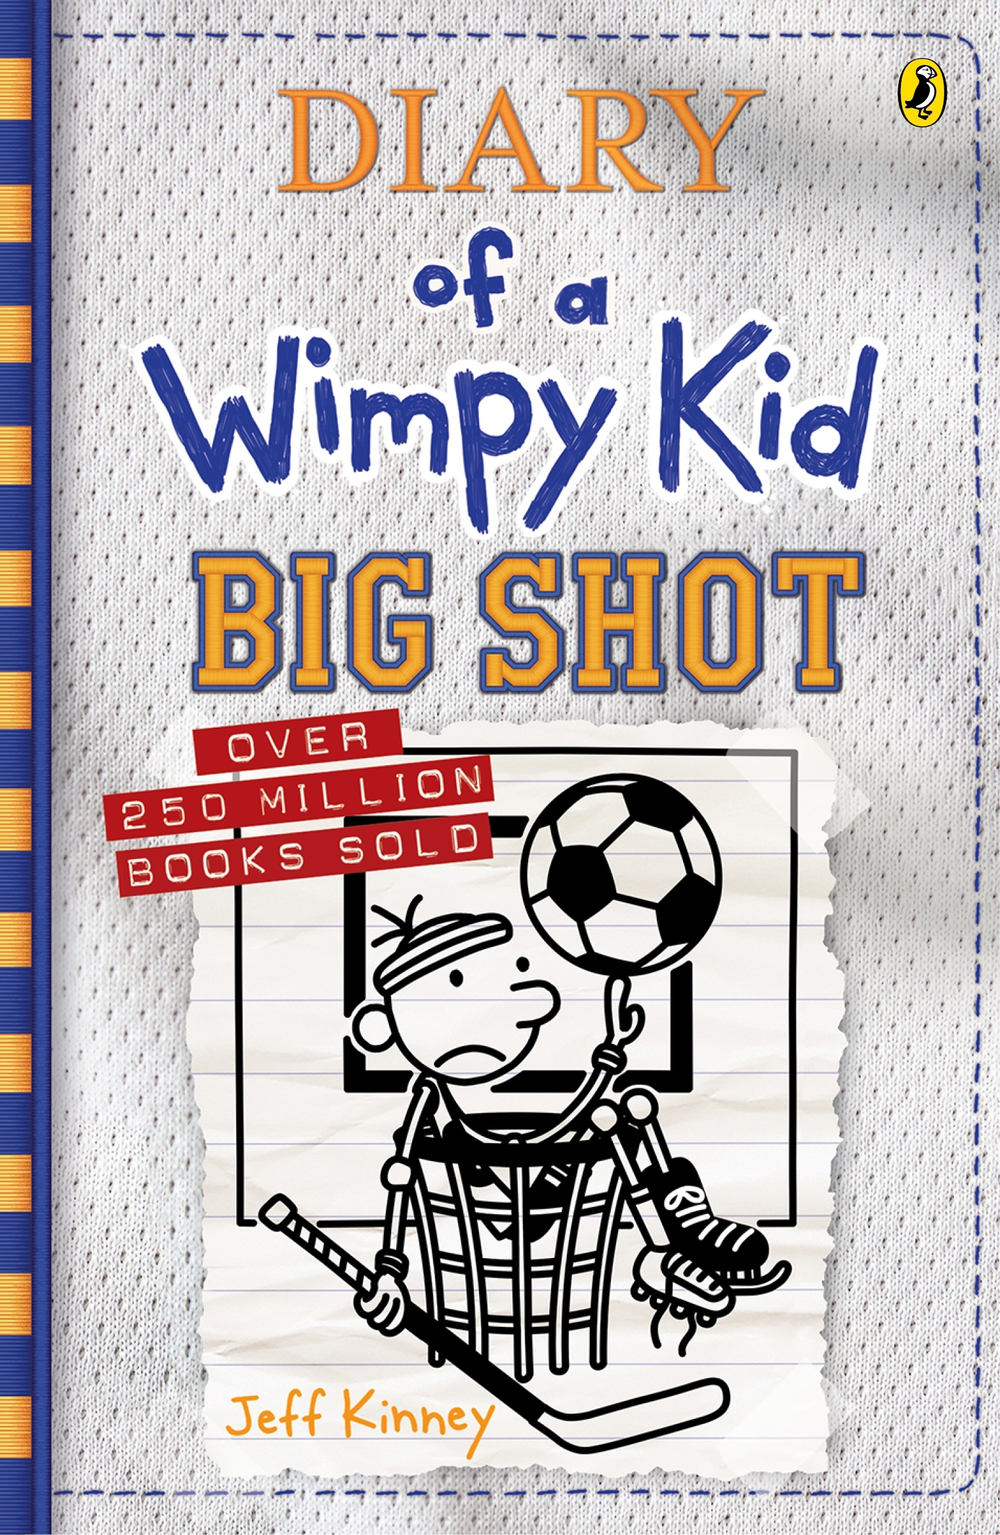 Kid wimpy of diary a Diary of